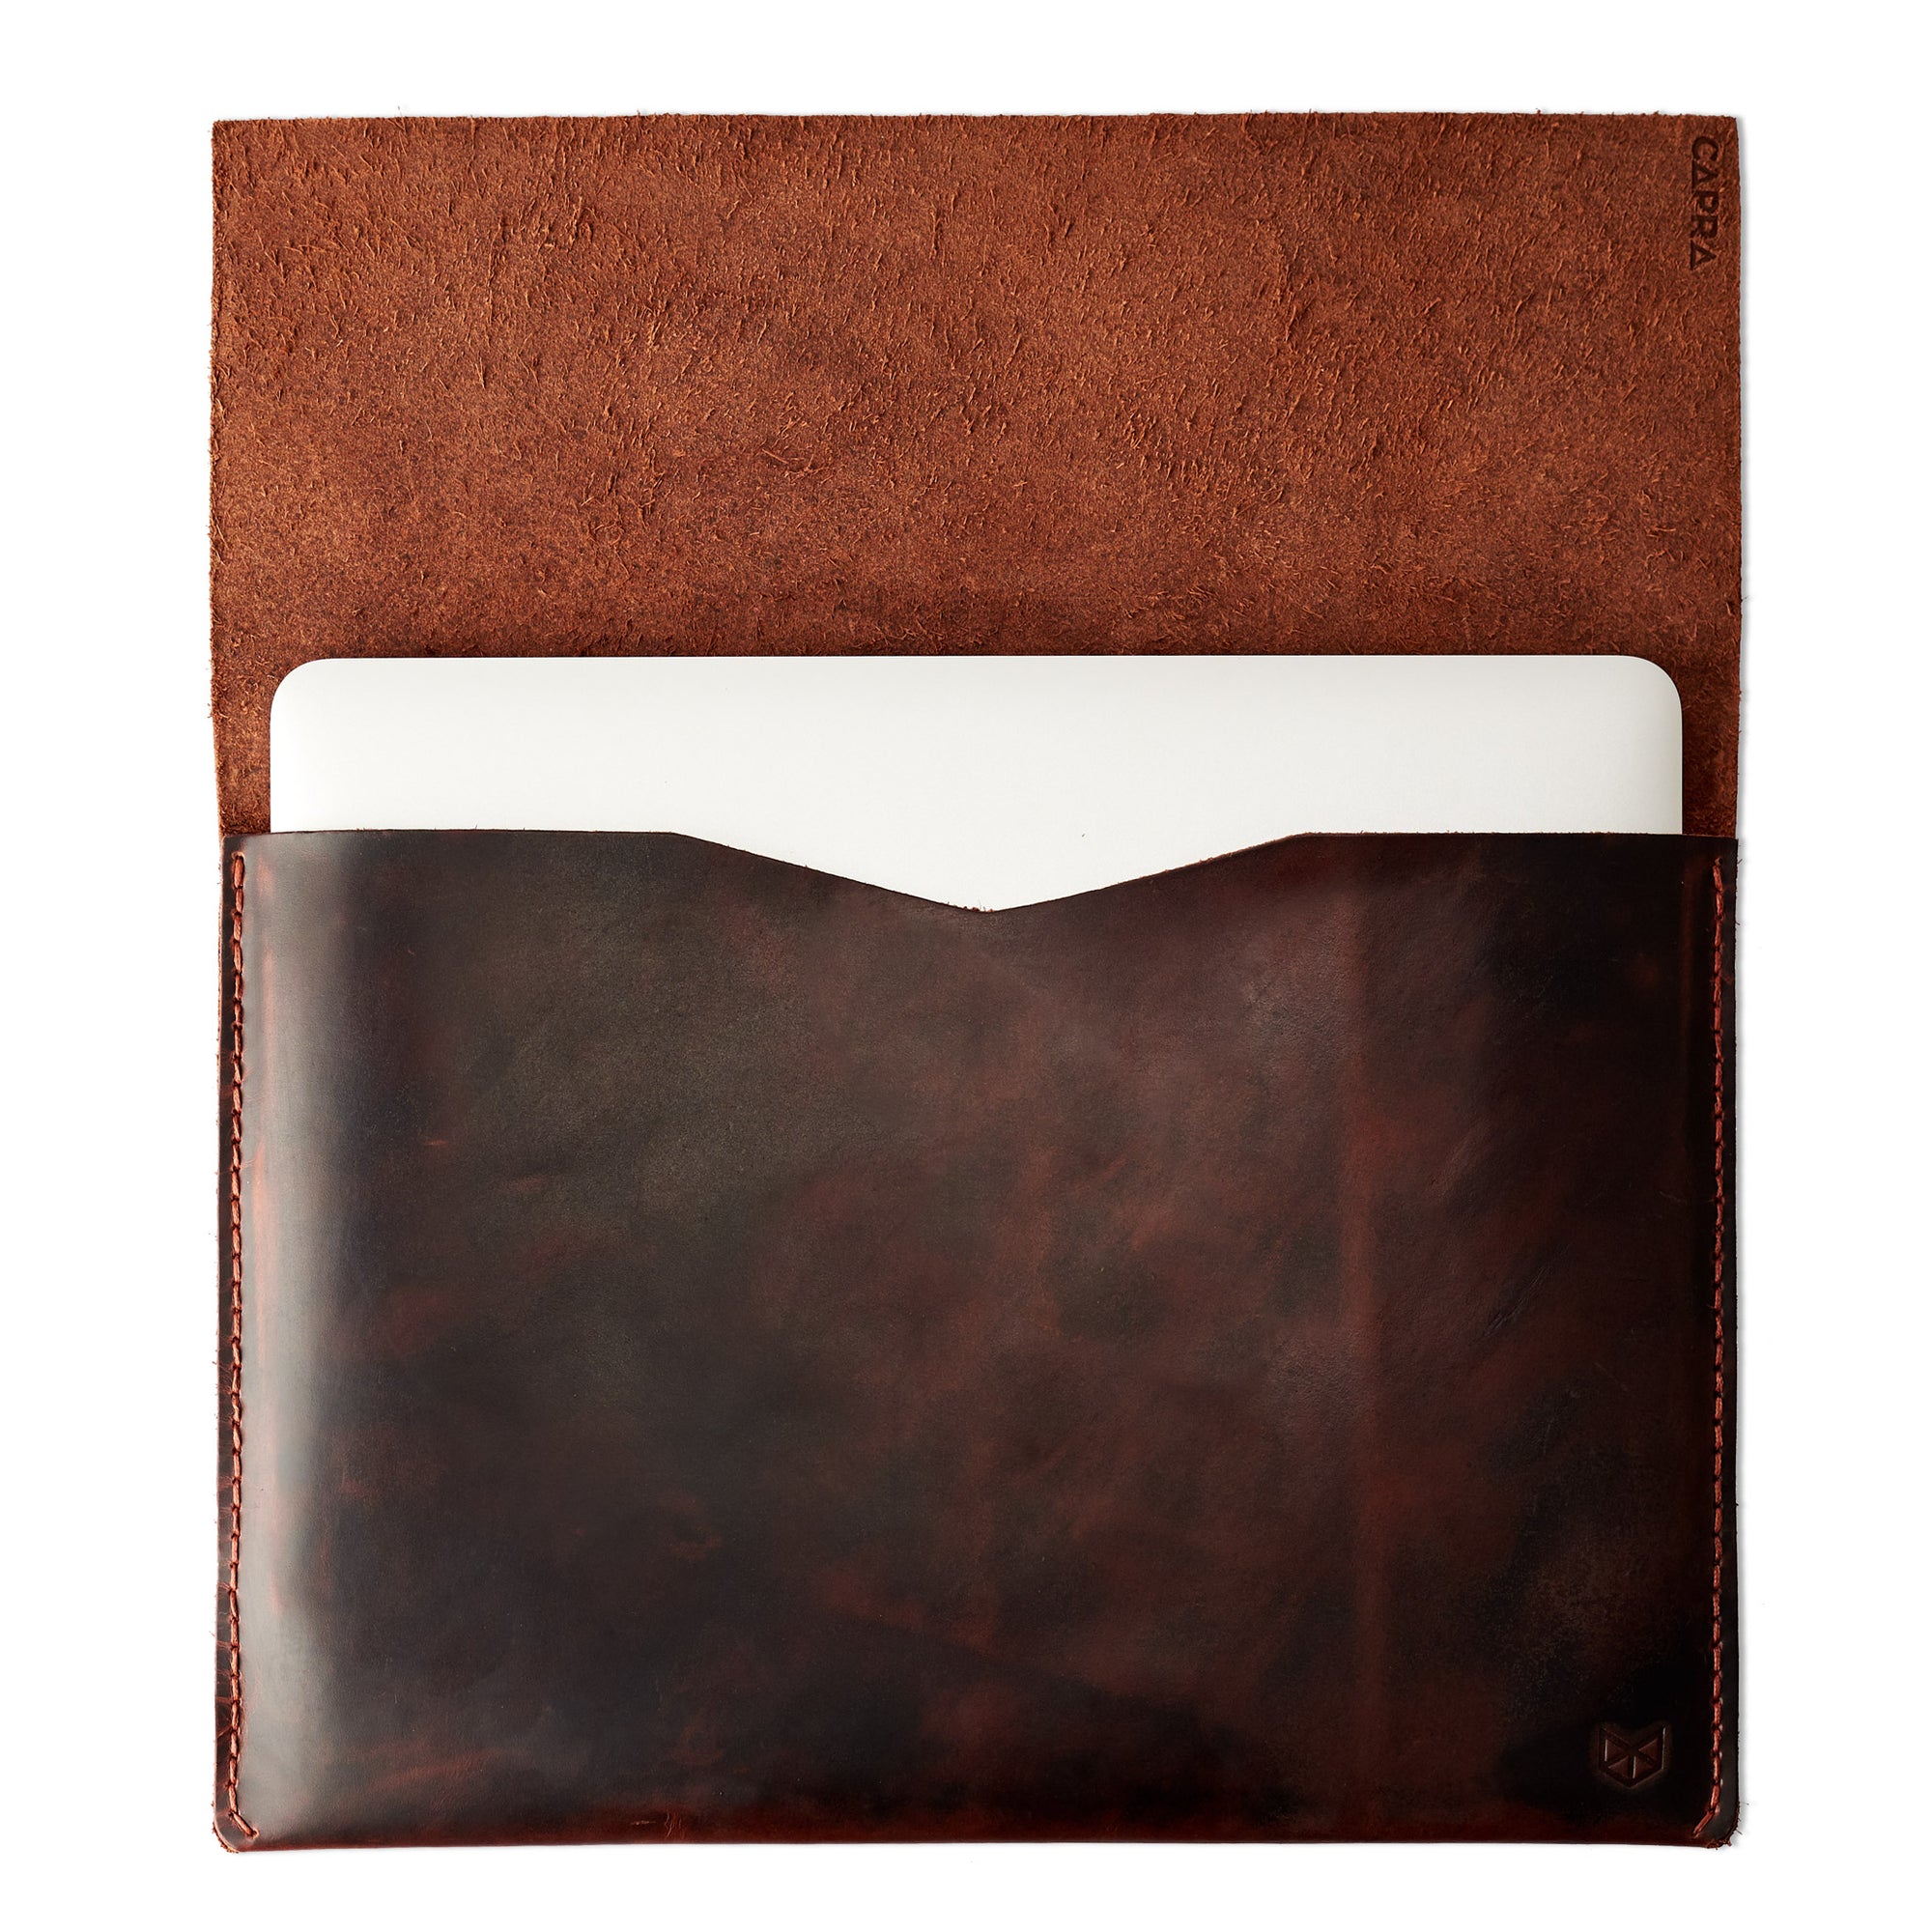 open case in red brown leather. Dell XPS 13" 15" sleeve by Capra Leather